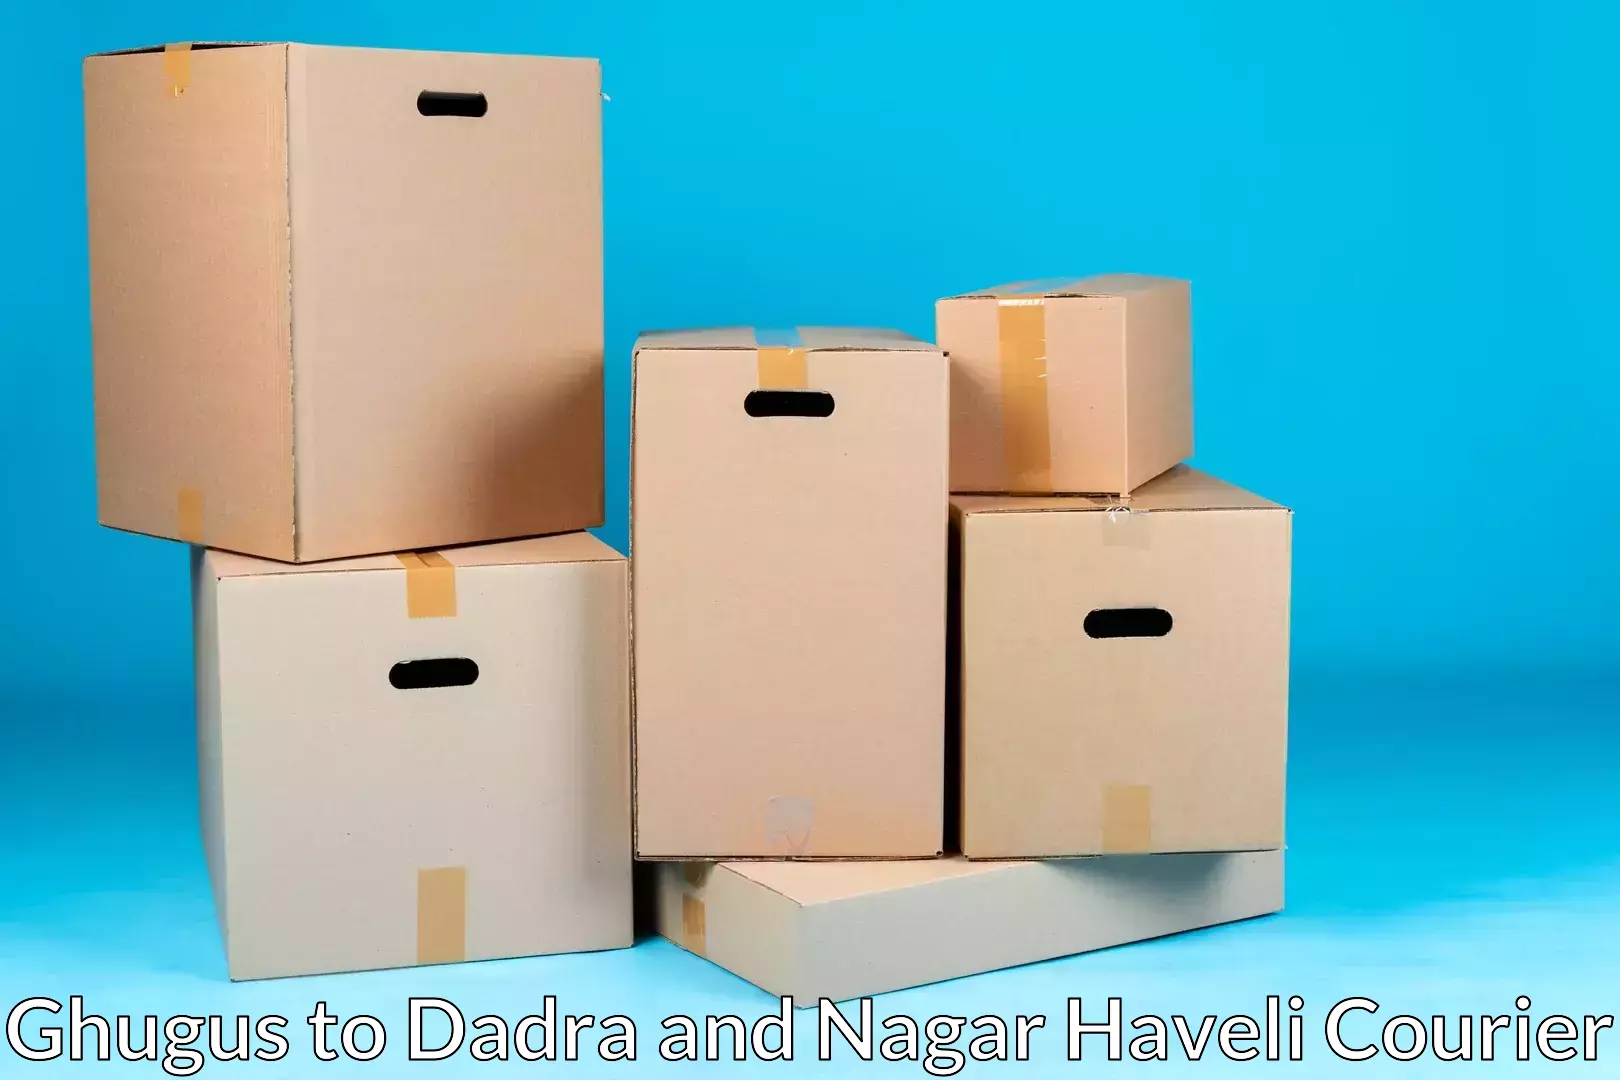 Furniture delivery service Ghugus to Dadra and Nagar Haveli